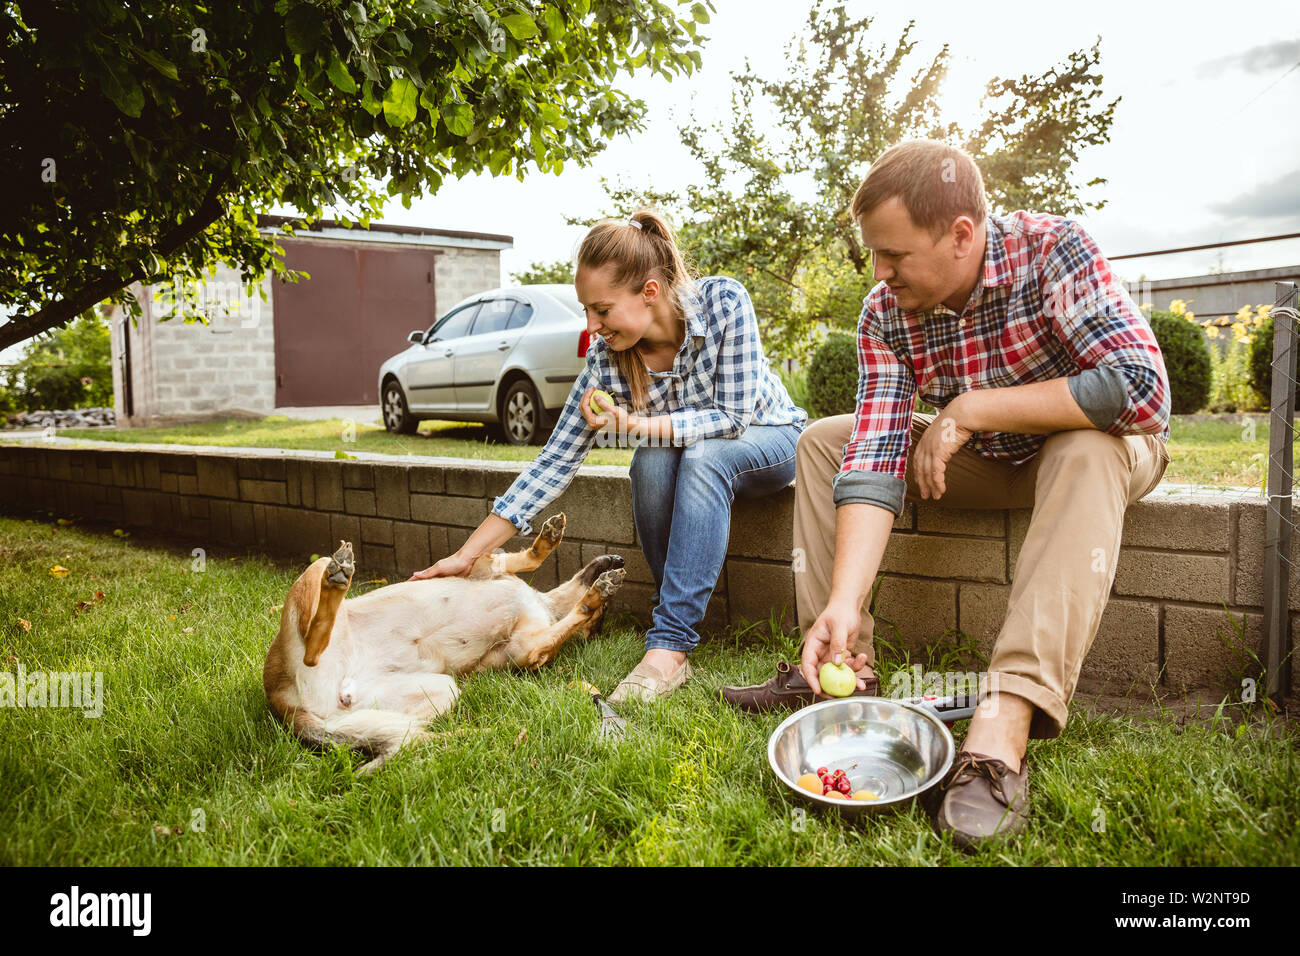 Young and happy farmer's couple at their garden near by home in sunny day. Man and woman playing with their dog and laughting. Concept of farming, agriculture, healthy lifestyle, family, relations. Stock Photo